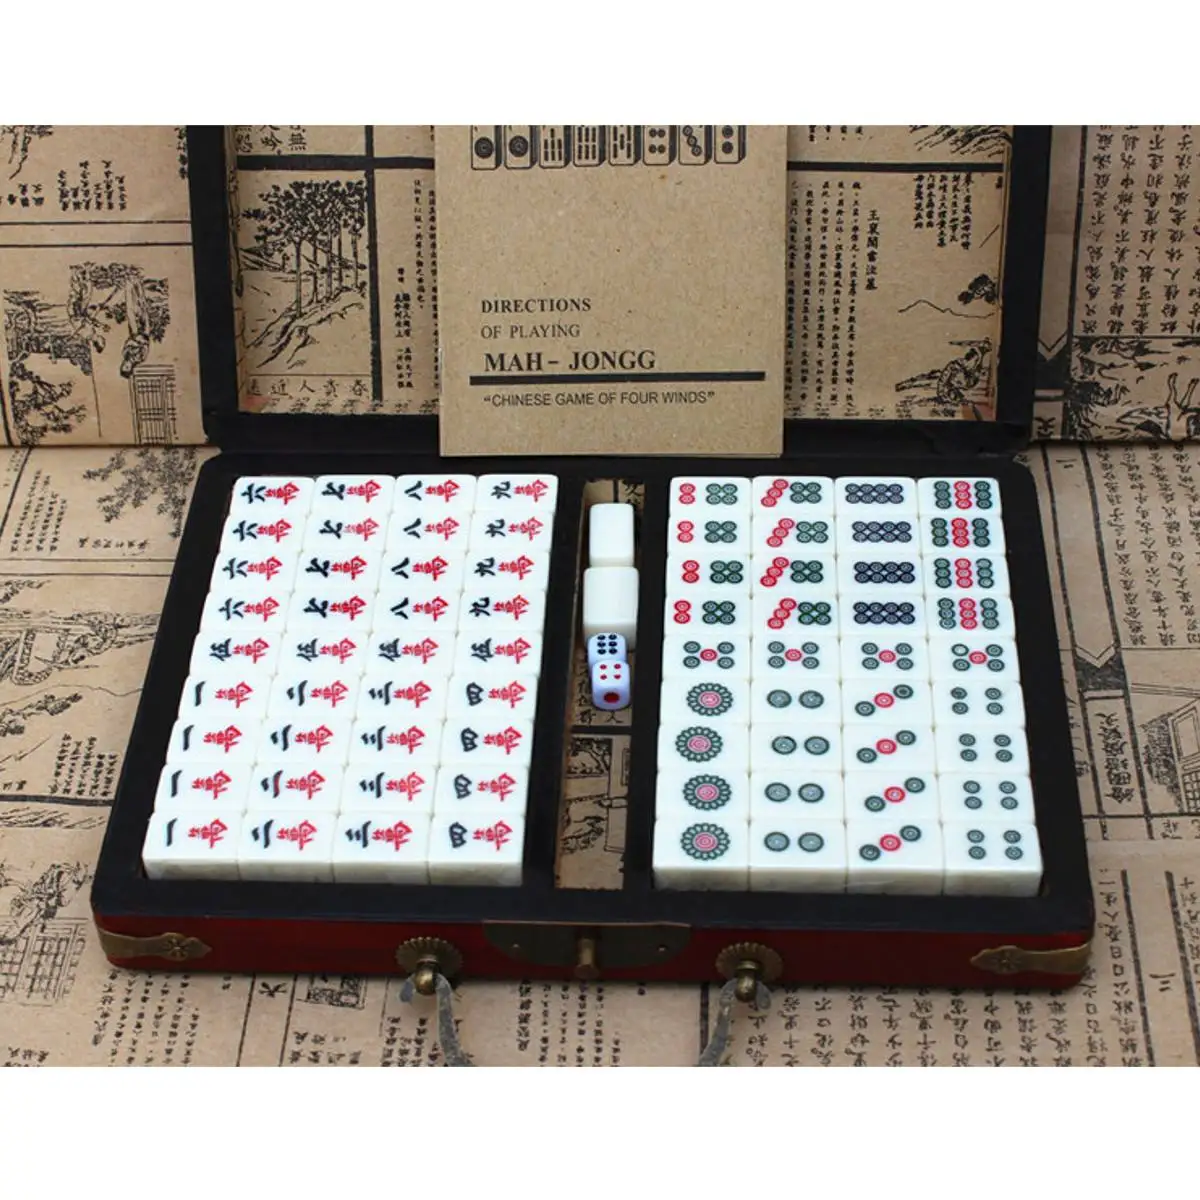 Siunwdiy Mahjong Retro Ivory White Mahjong Set Mahjong Melamine 144 Pieces with Deluxe Retro Style Entertainment Casual Educational Toys Creative Leather Box for Home Party,Brown